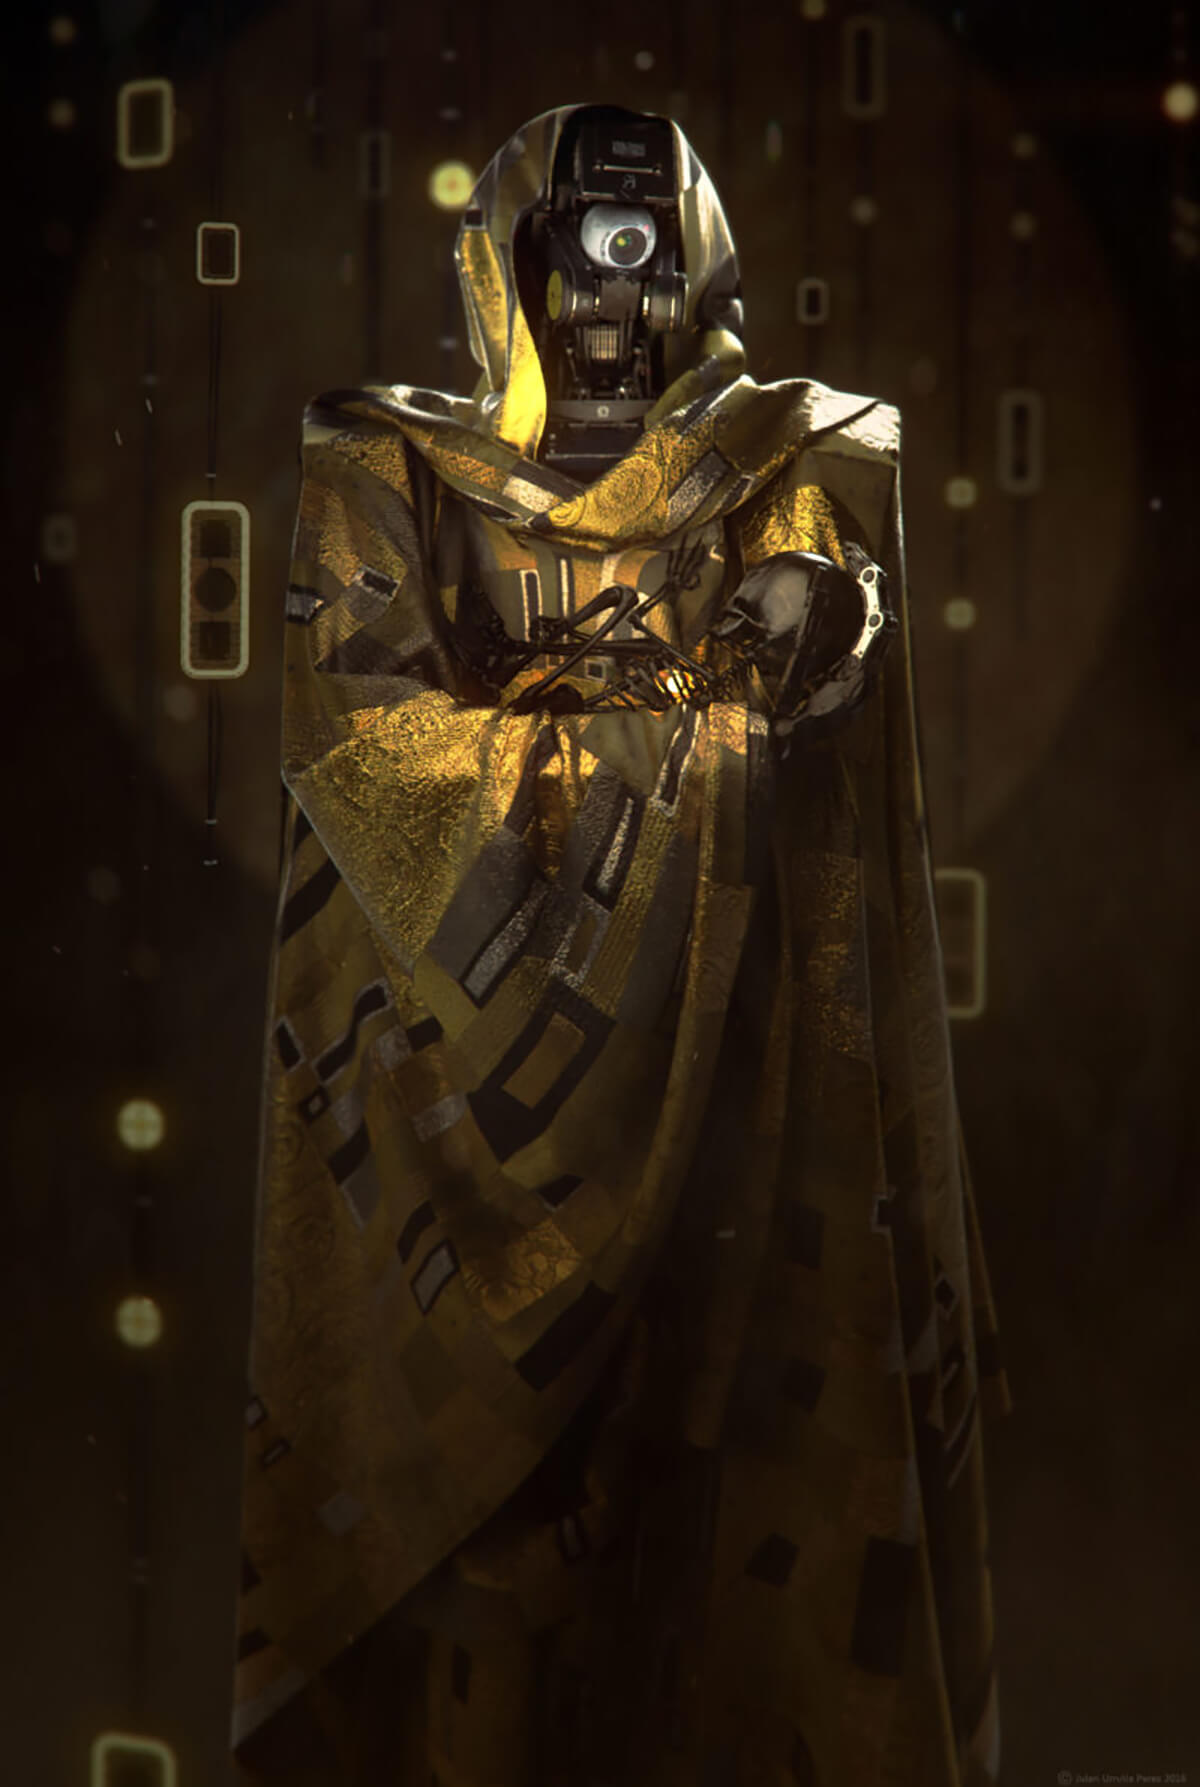 A one-eyed robot in a golden hood and cape, inspired by the work of Gustav Klimt